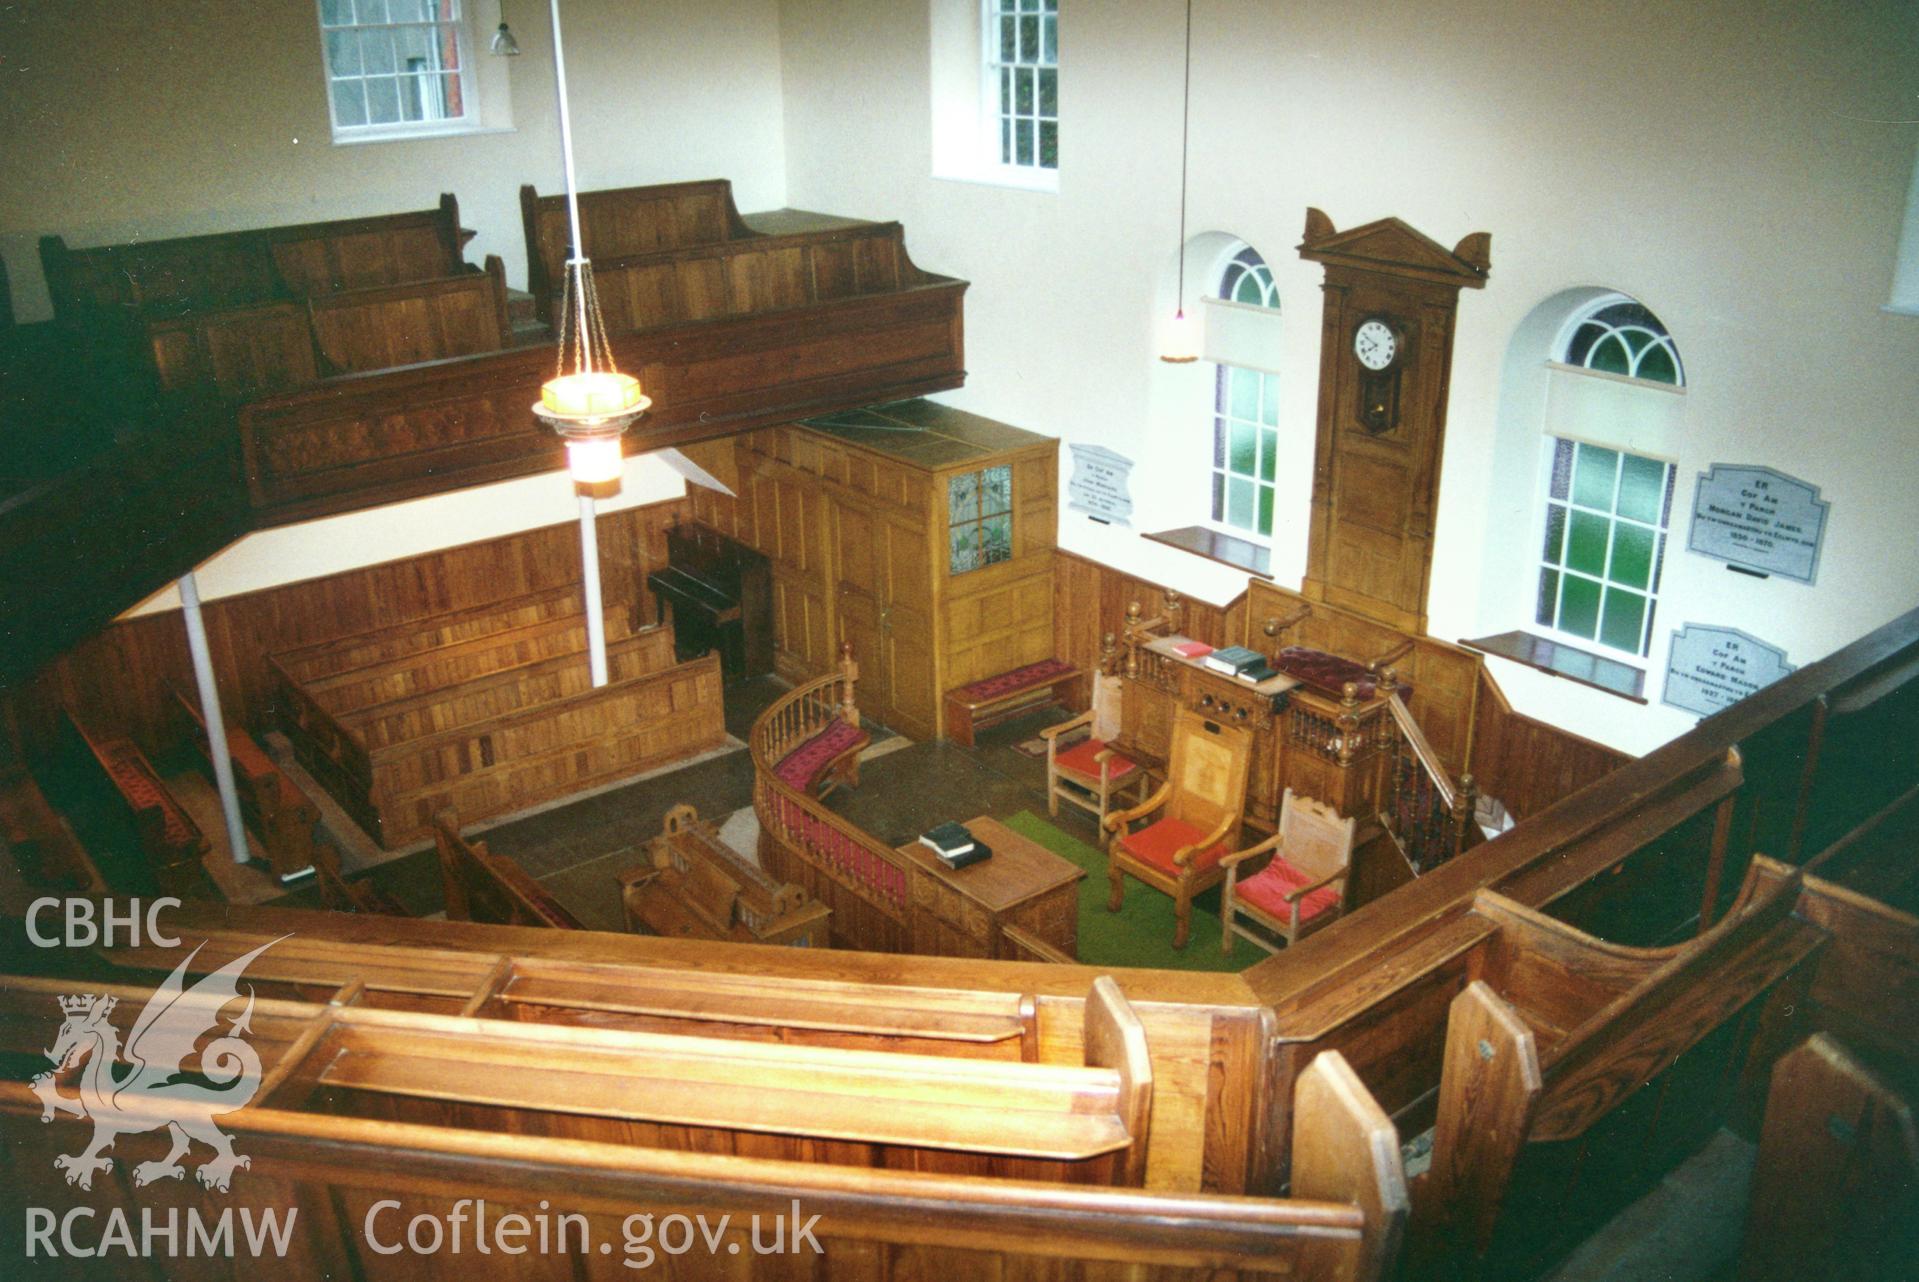 Digital copy of a colour photograph showing an interior view of the Rhiw-bwys Welsh Calvinistic Methodist Chapel,  taken by Robert Scourfield, c.1996.